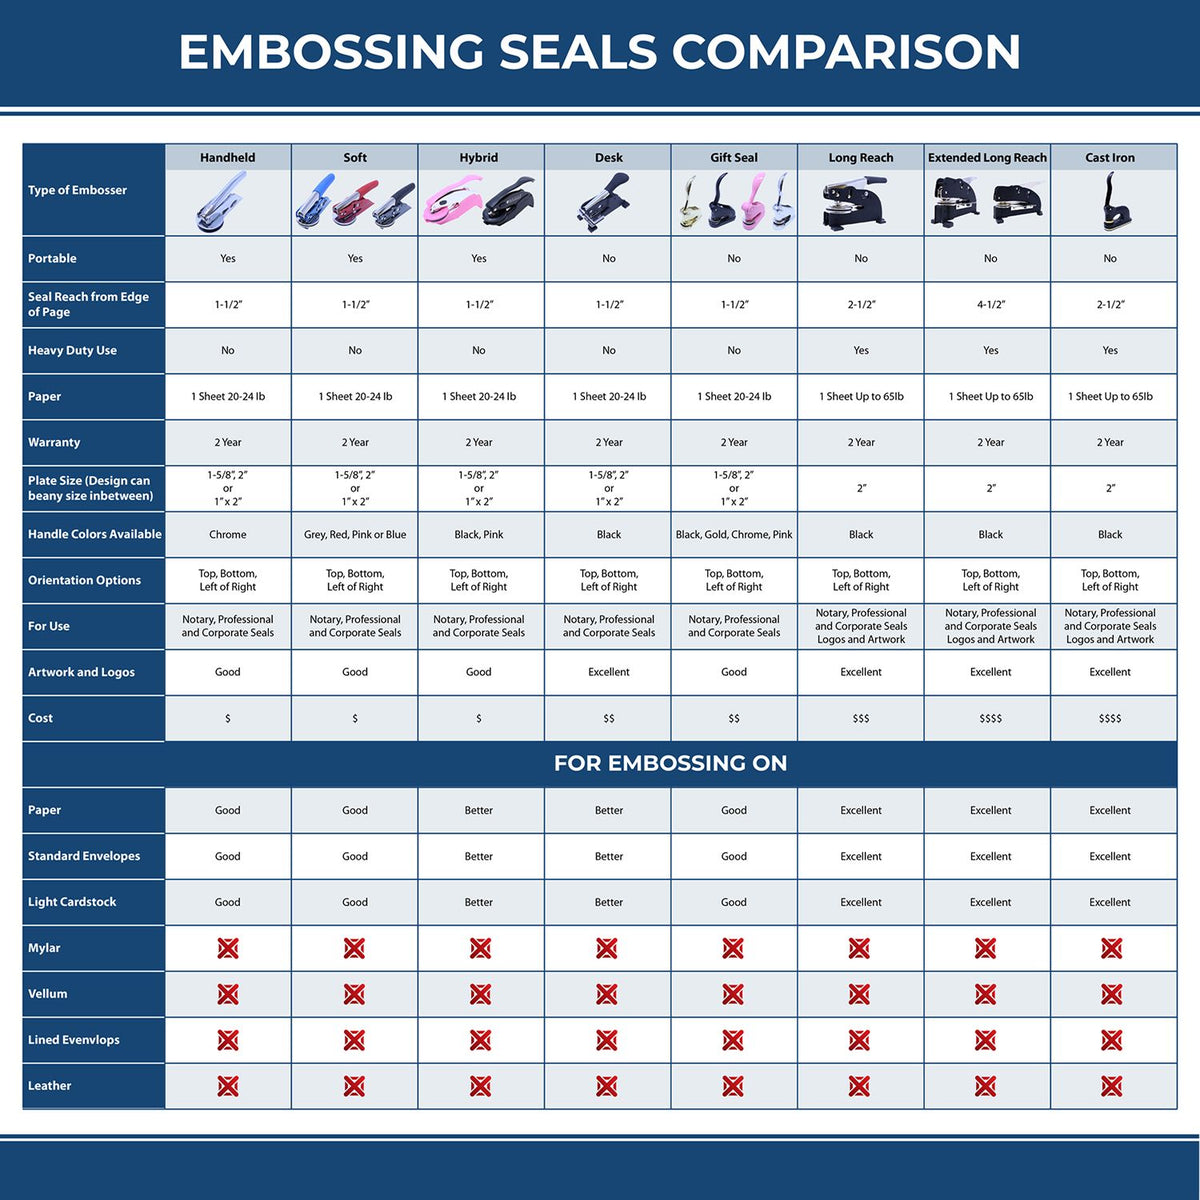 A comparison chart for the different types of mount models available for the Iowa Desk Surveyor Seal Embosser.